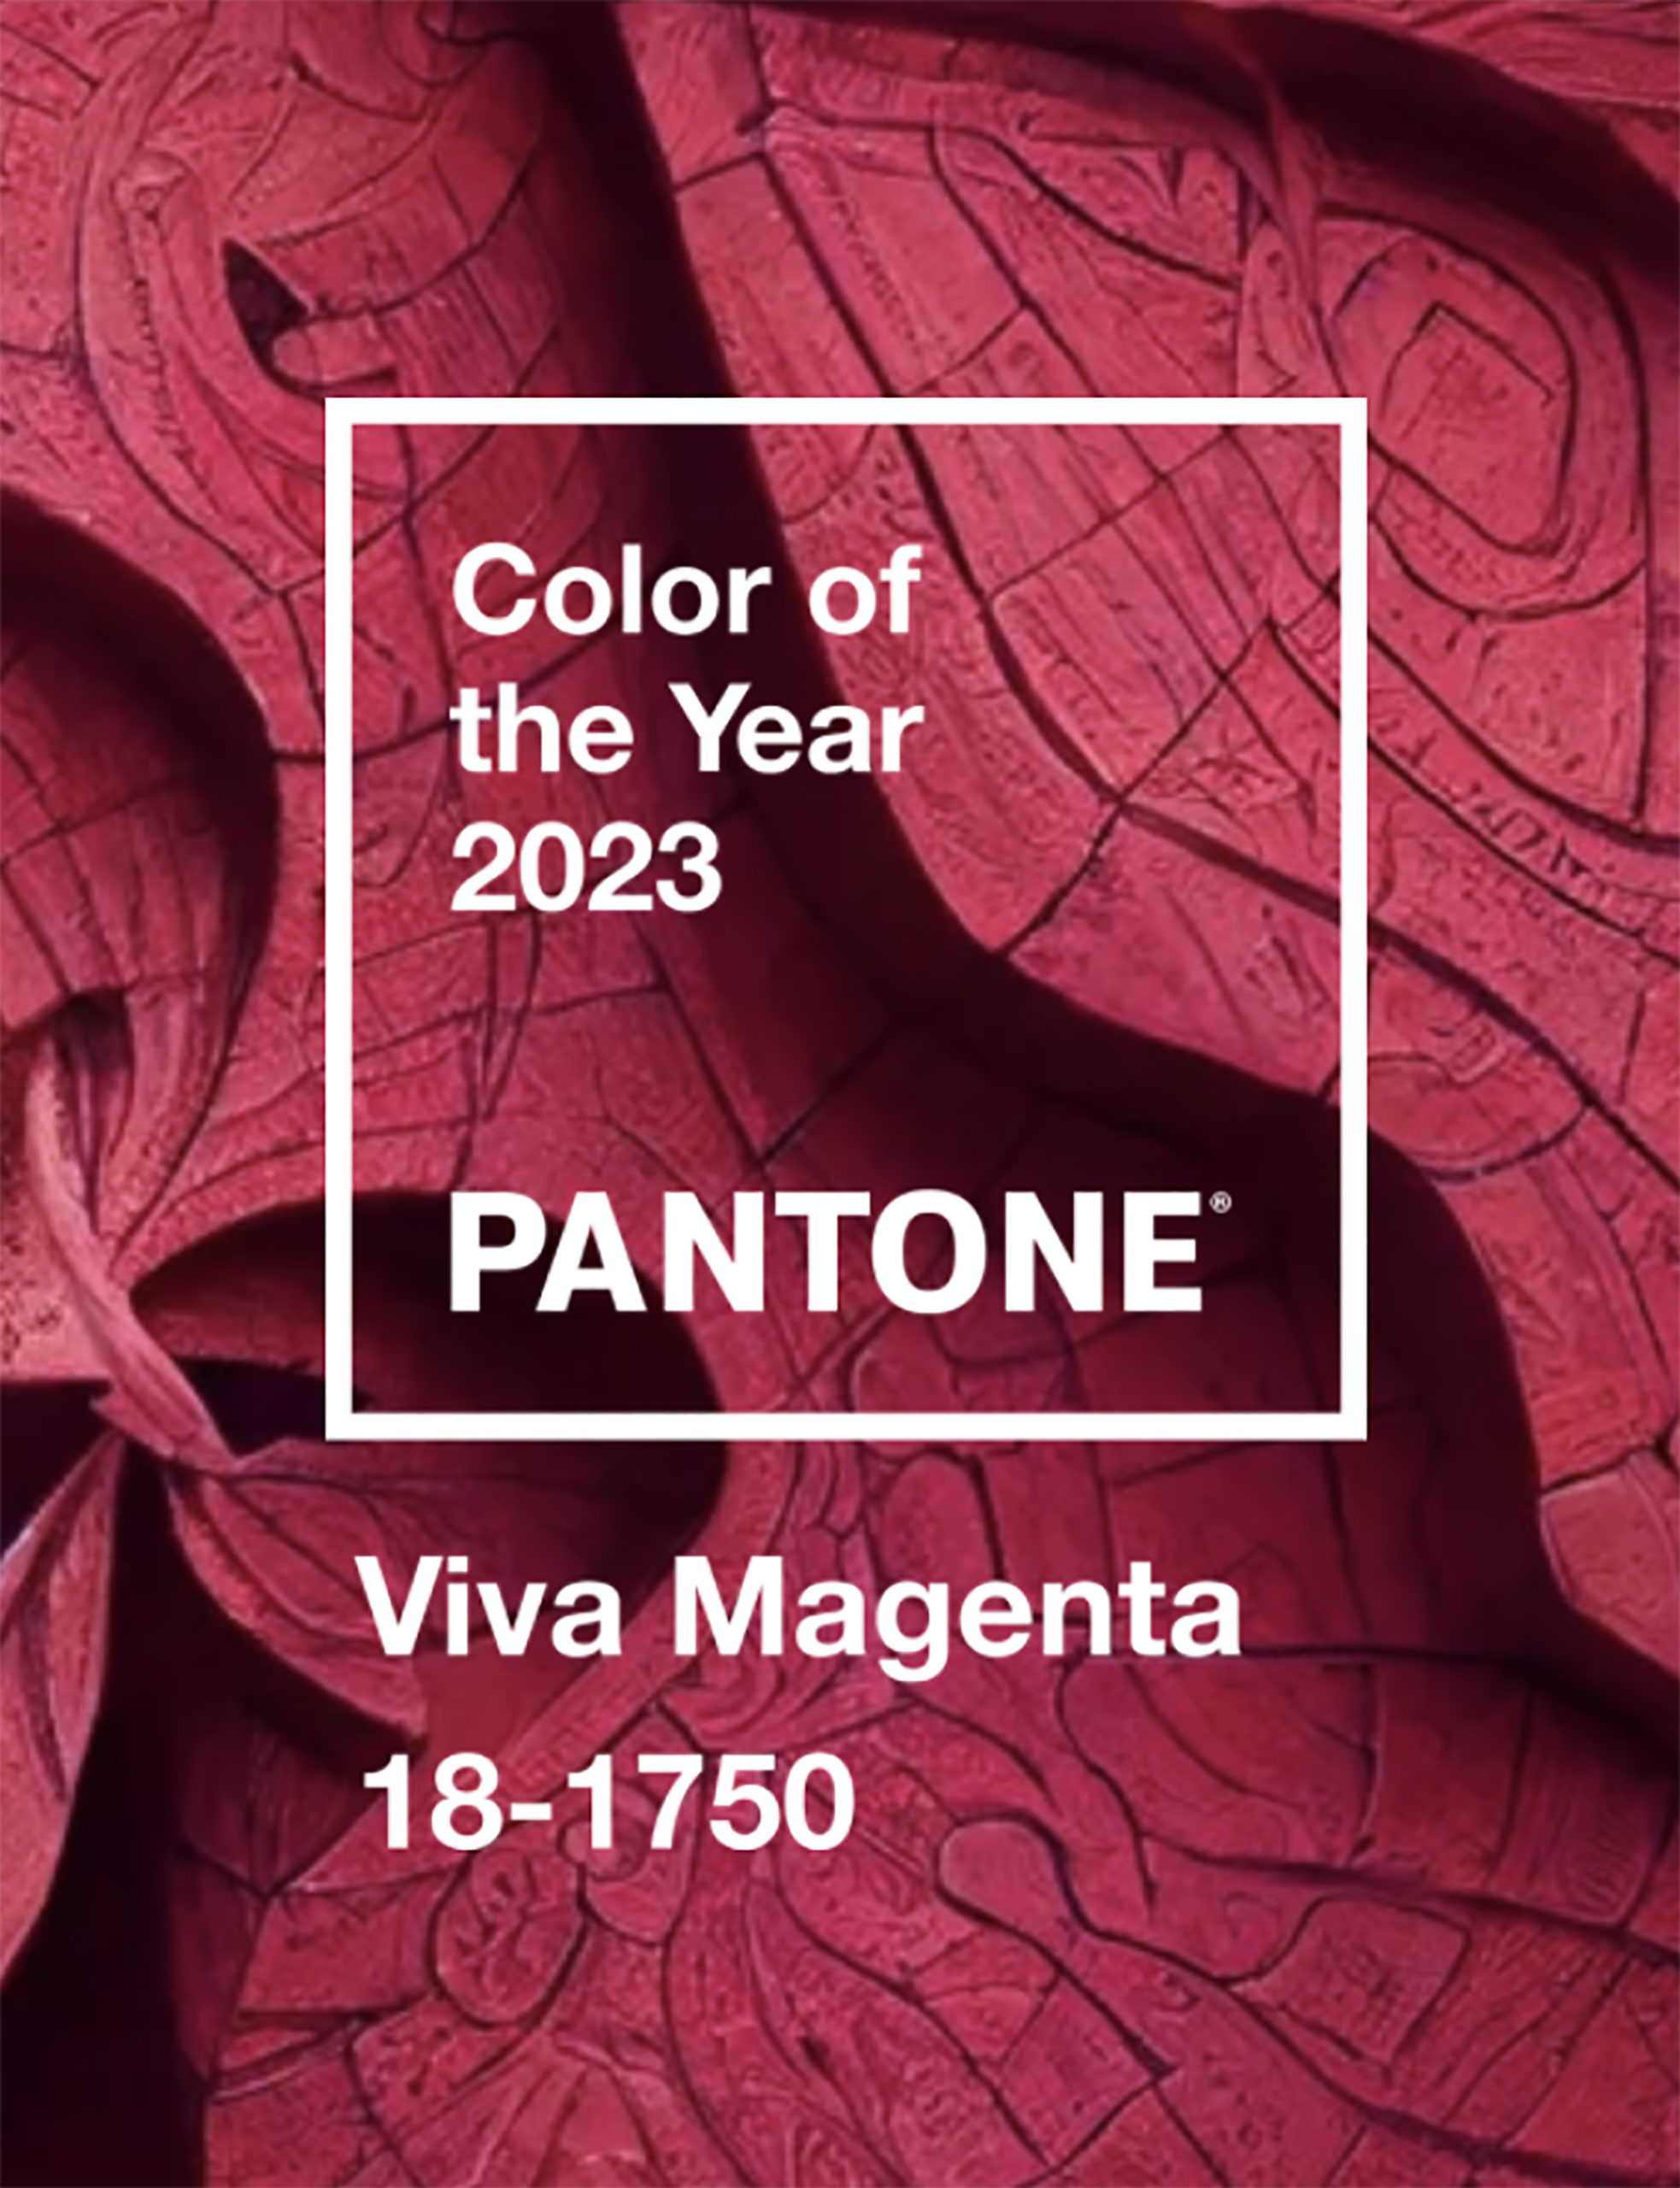 Viva Magenta 18-1750 is the 'Color of the Year